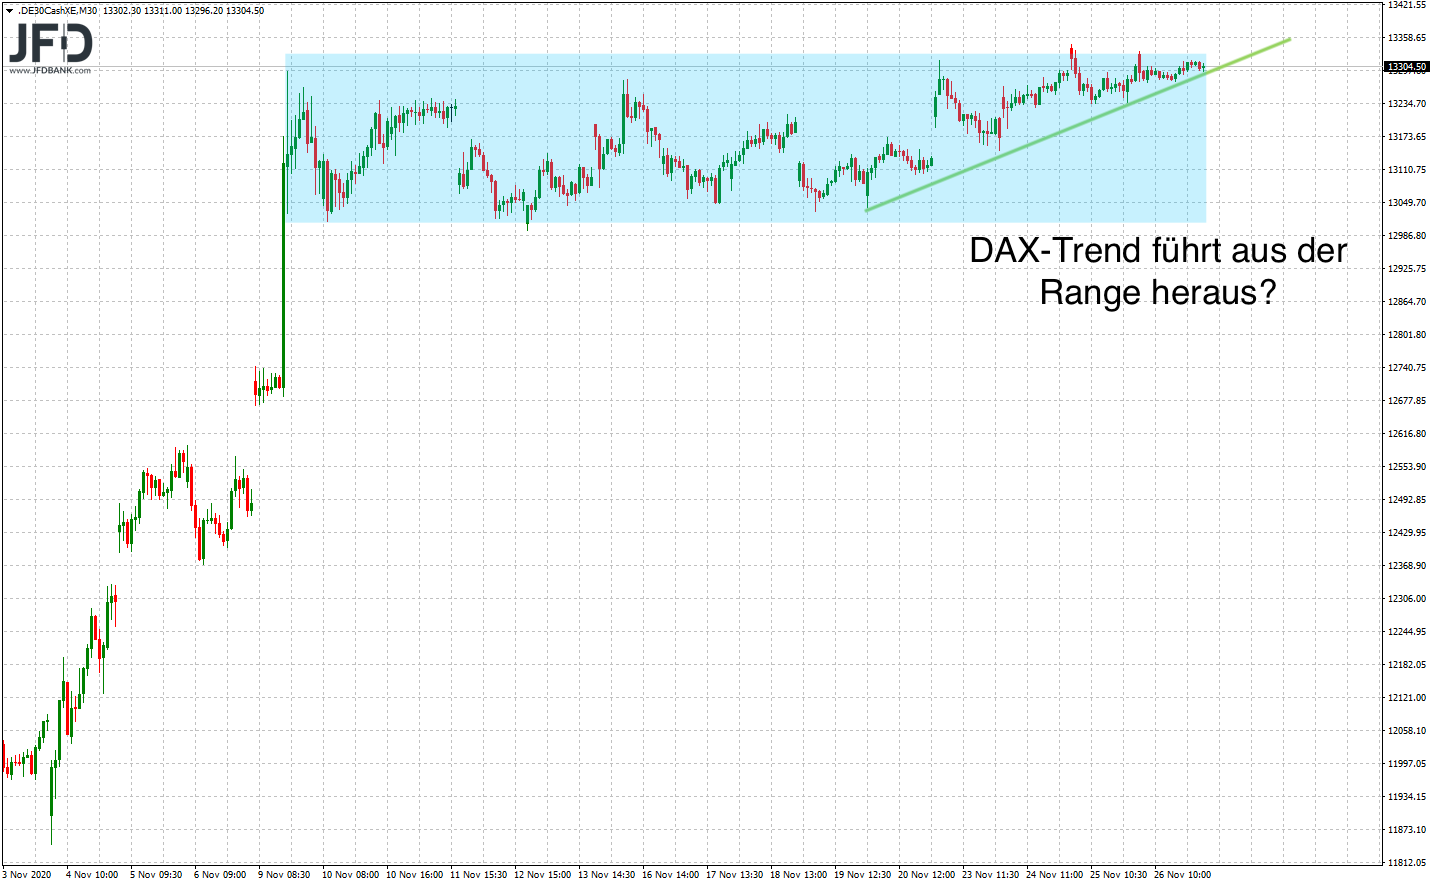 20201127_dax_xetra_range_trend.png